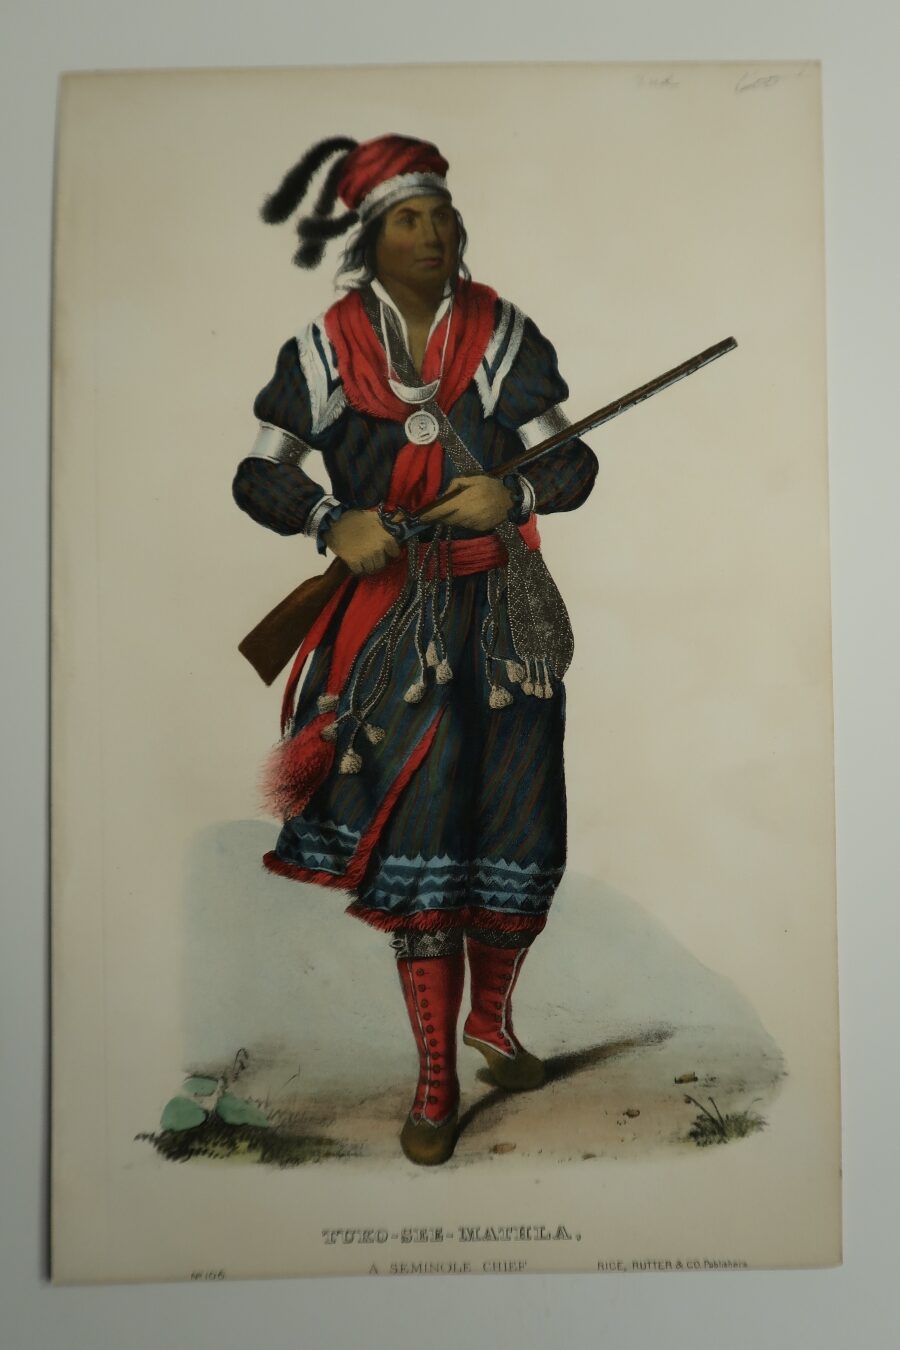 TUKO-SEE-MATHLA Seminole Chief. Hand-colored lithograph, over 100 years old, full length, Seminole indian..